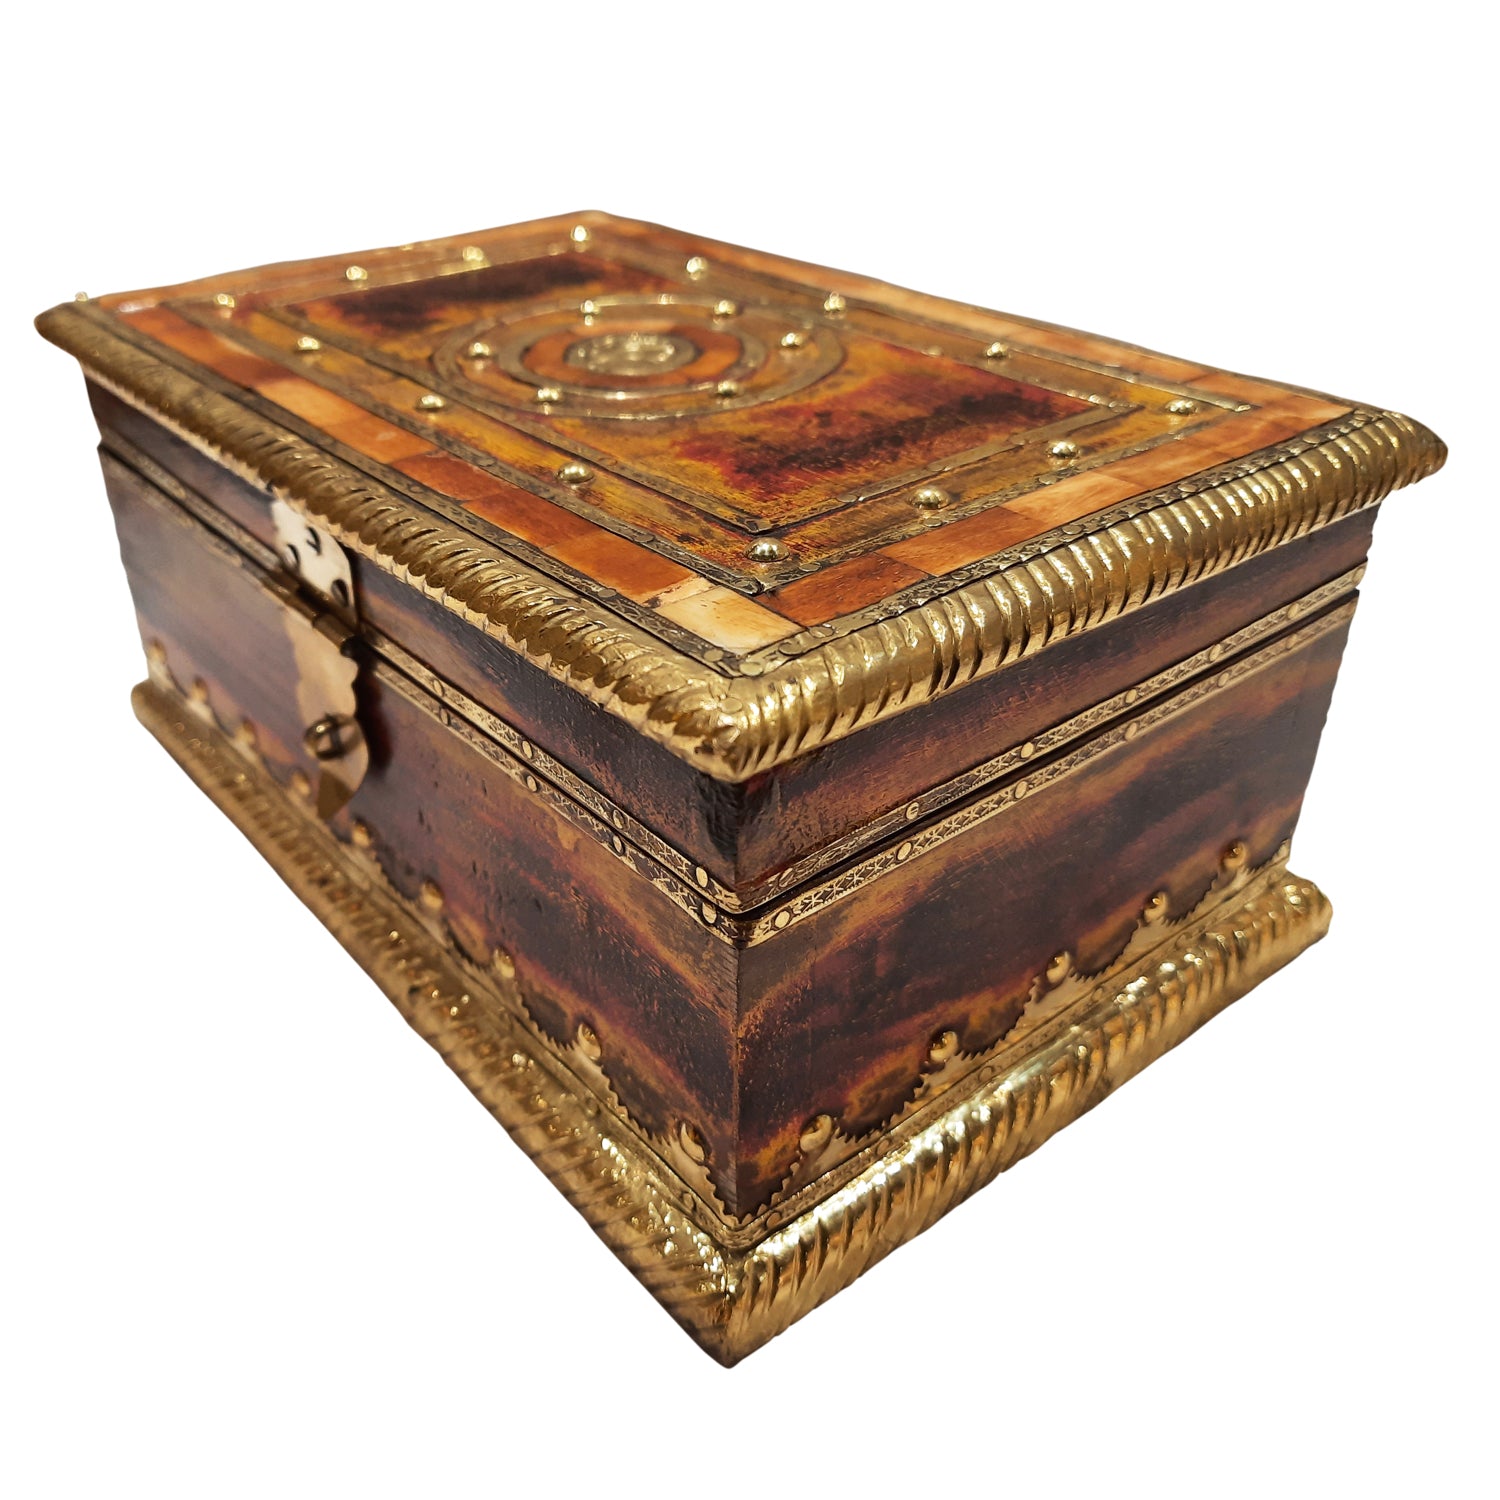 The Bombay Store Wooden Box with Brass Fitting